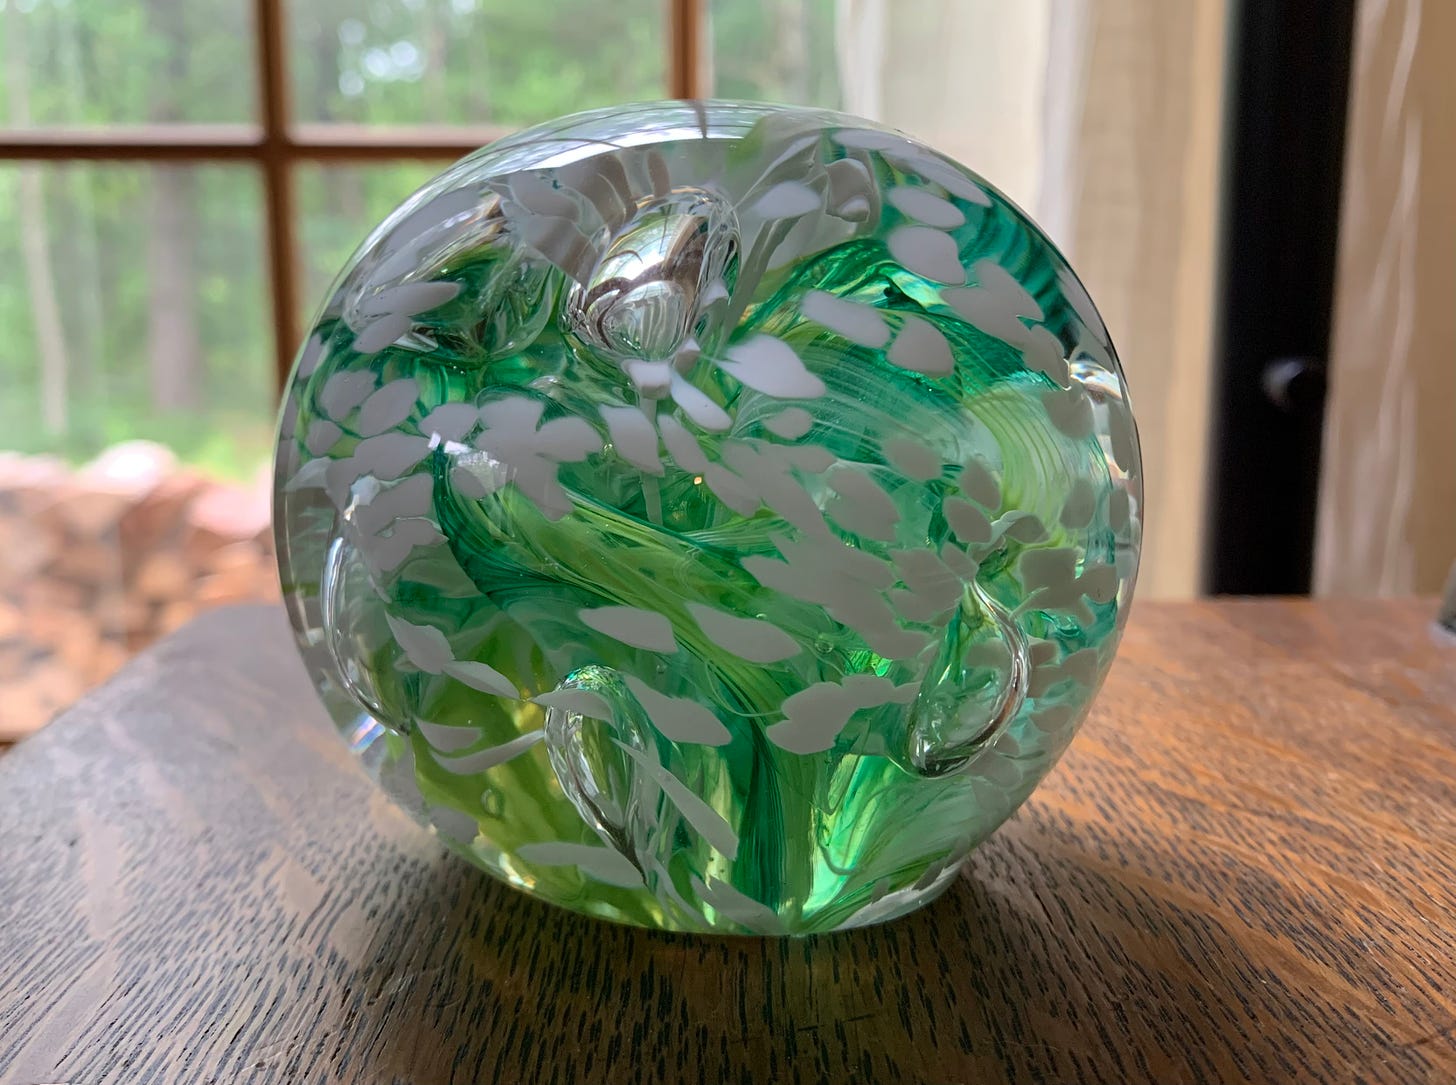 A handblown glass sphere with swirls of green, yellow, and white running through it.